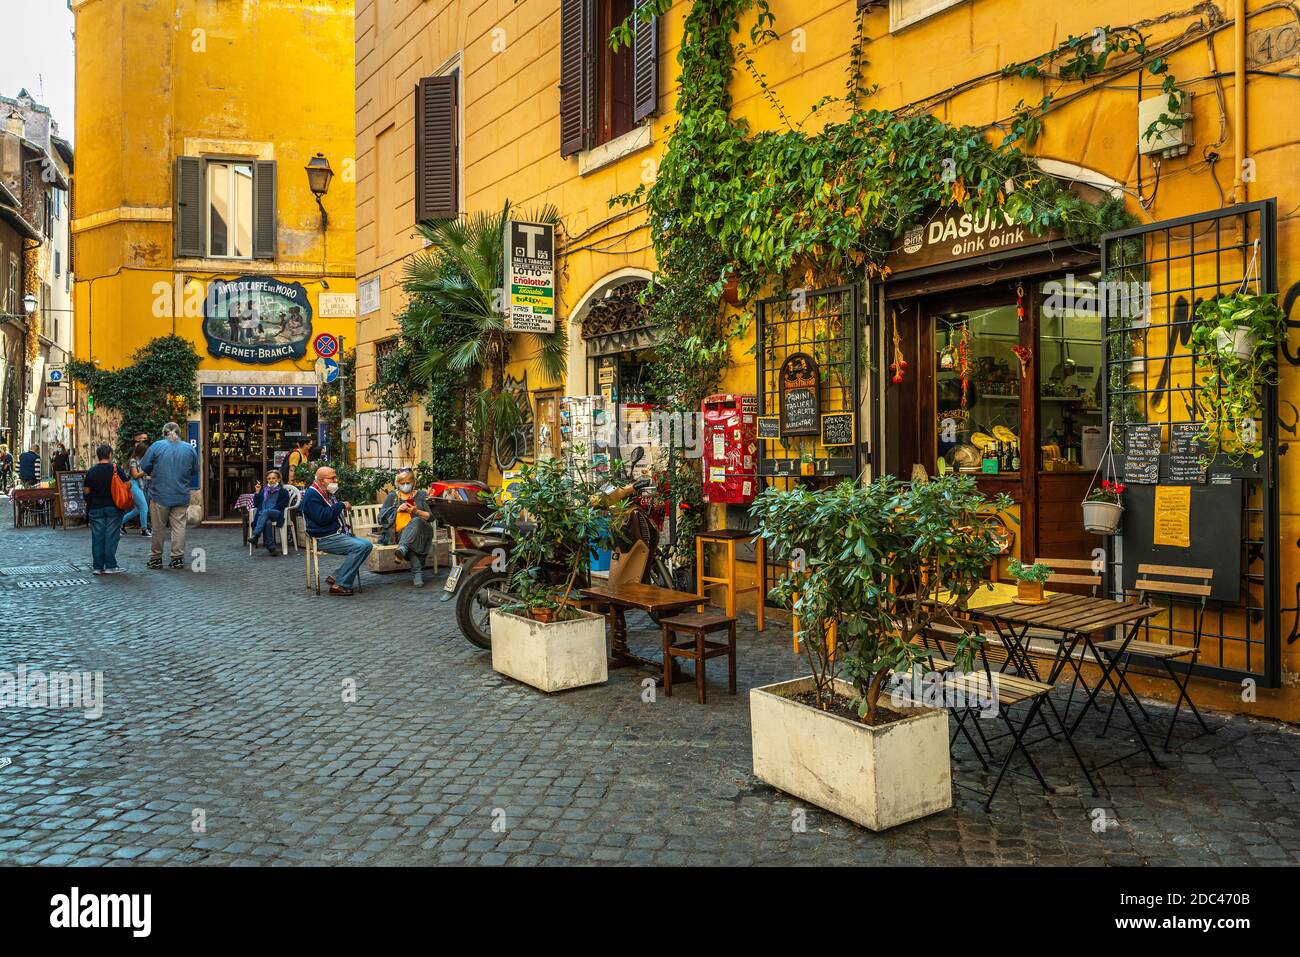 Beautiful old street in Trastevere, Rome, with typical outdoor restaurants. Rome, Lazio, Italy, Europe Stock Photo